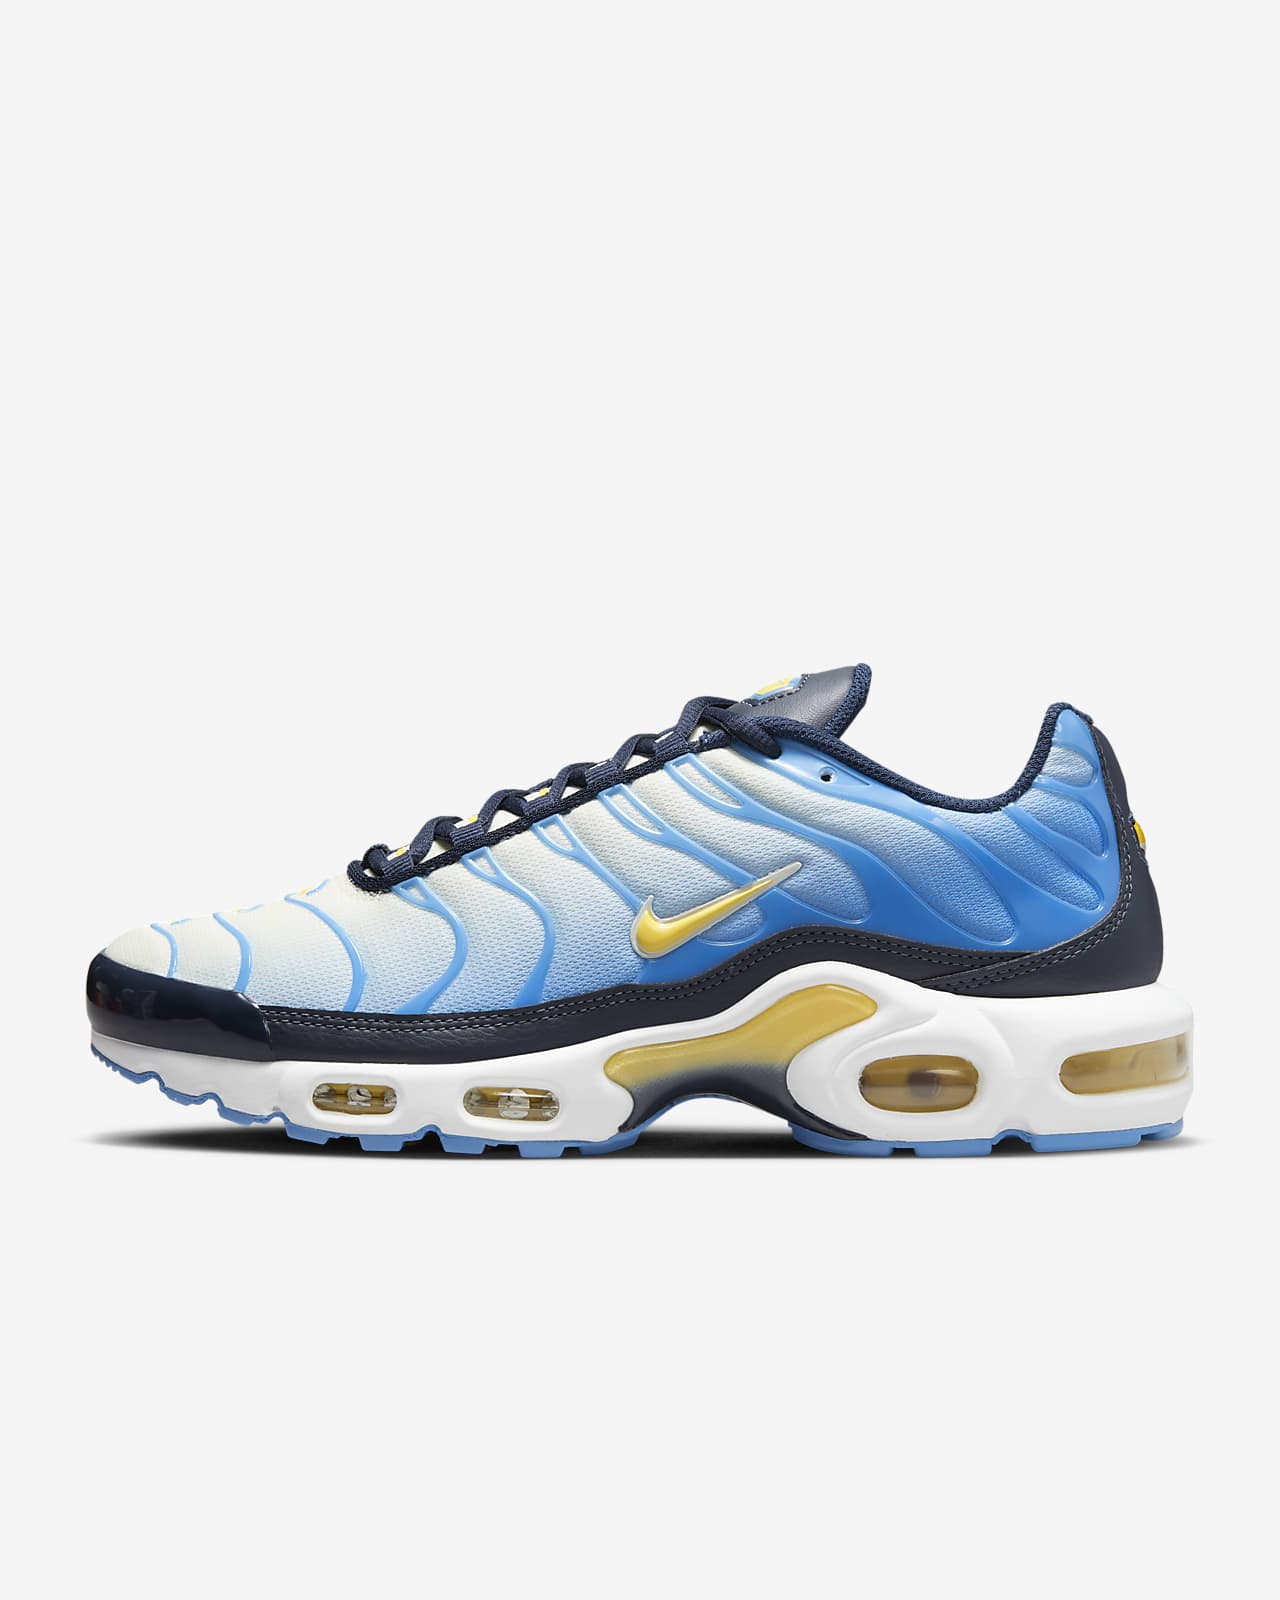 Chaussure Max Plus pour Nike BE